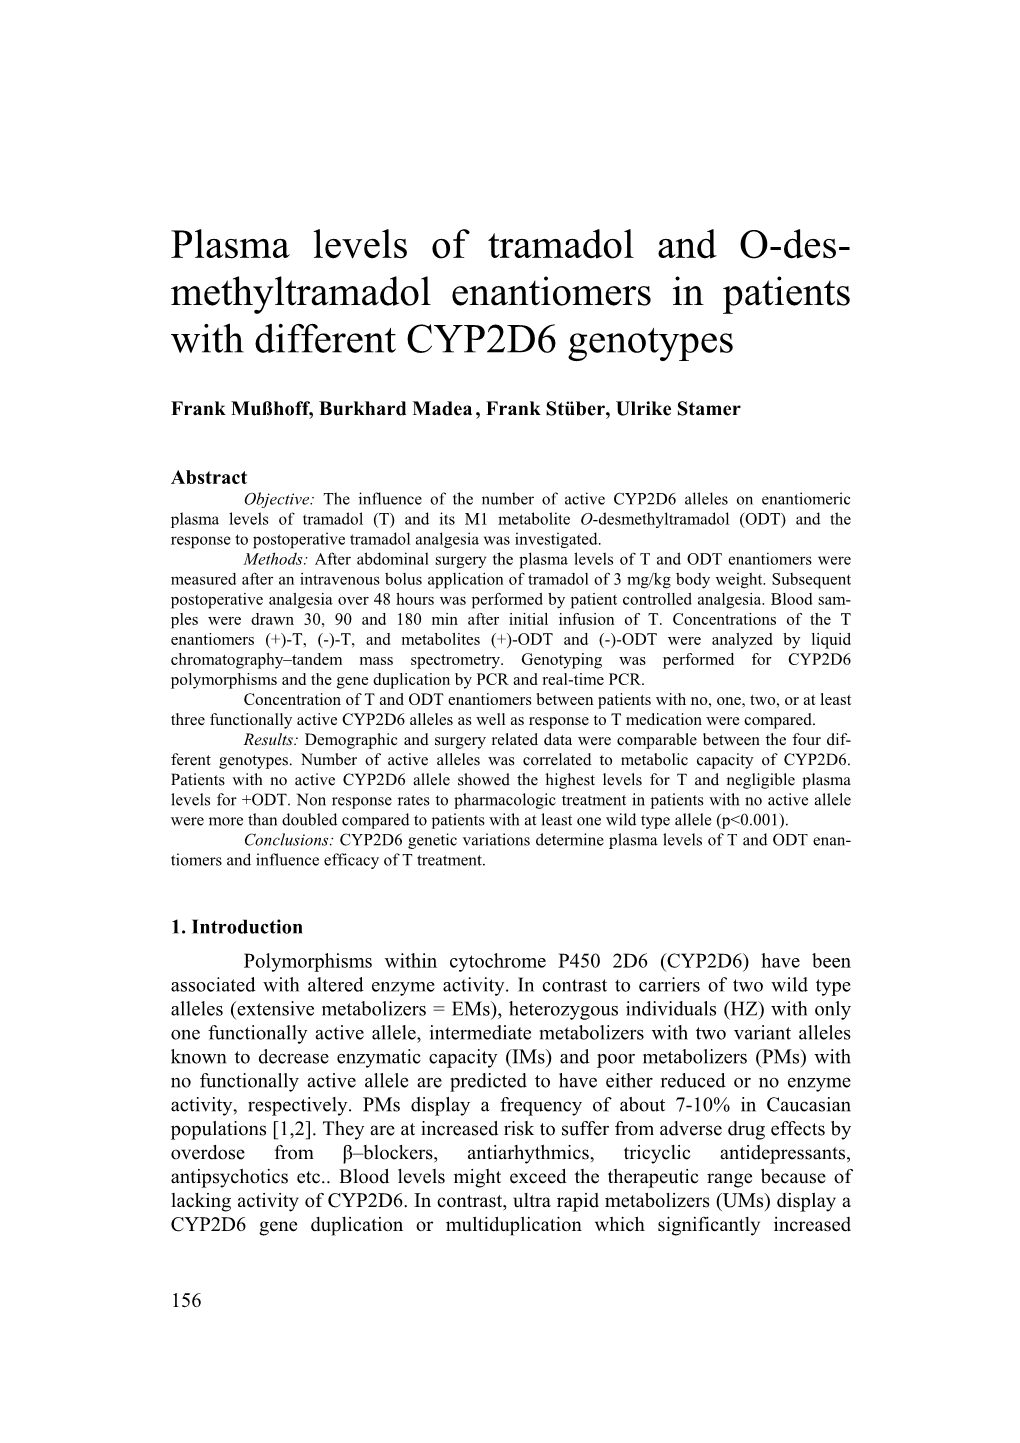 Plasma Levels of Tramadol and O-Des- Methyltramadol Enantiomers in Patients with Different CYP2D6 Genotypes